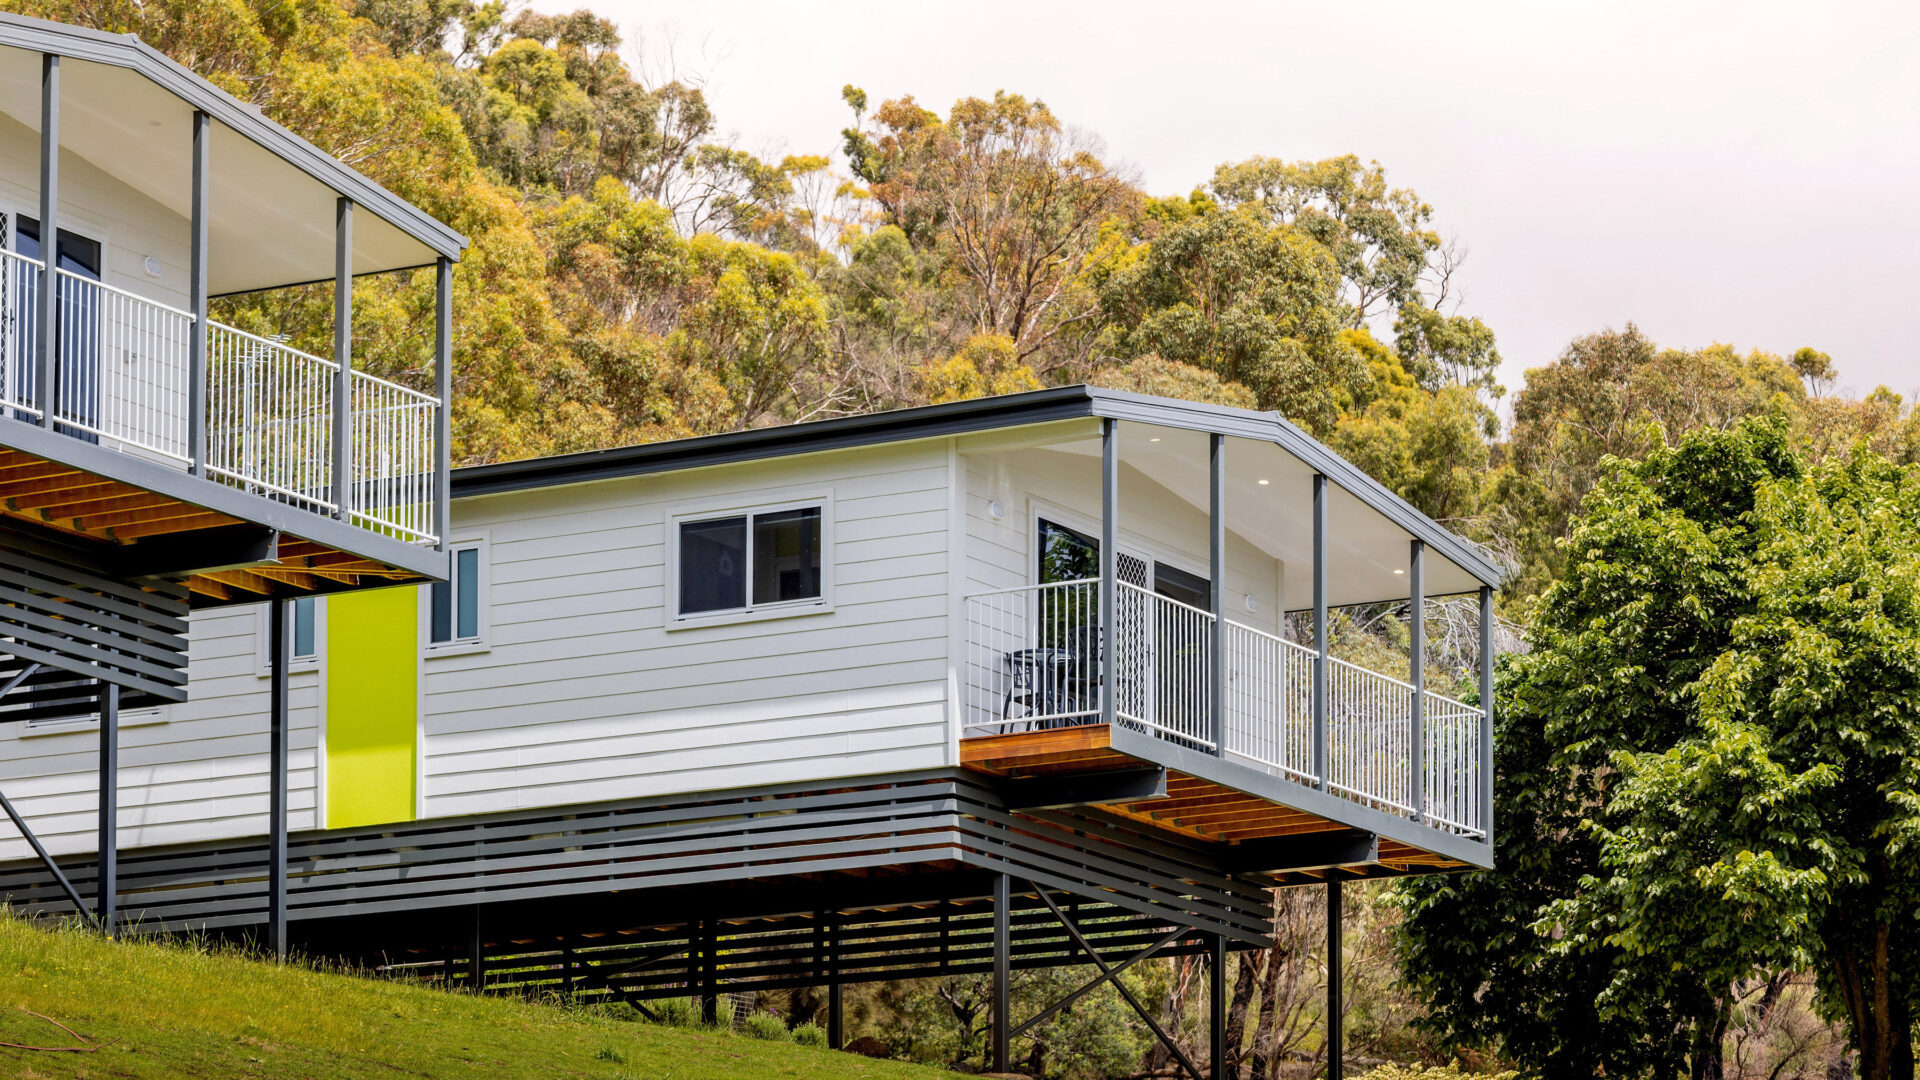 Picture of exterior of a Hilltop Villa at BIG4 Launceston. Located in a highly elevated position overlooking the launceston city